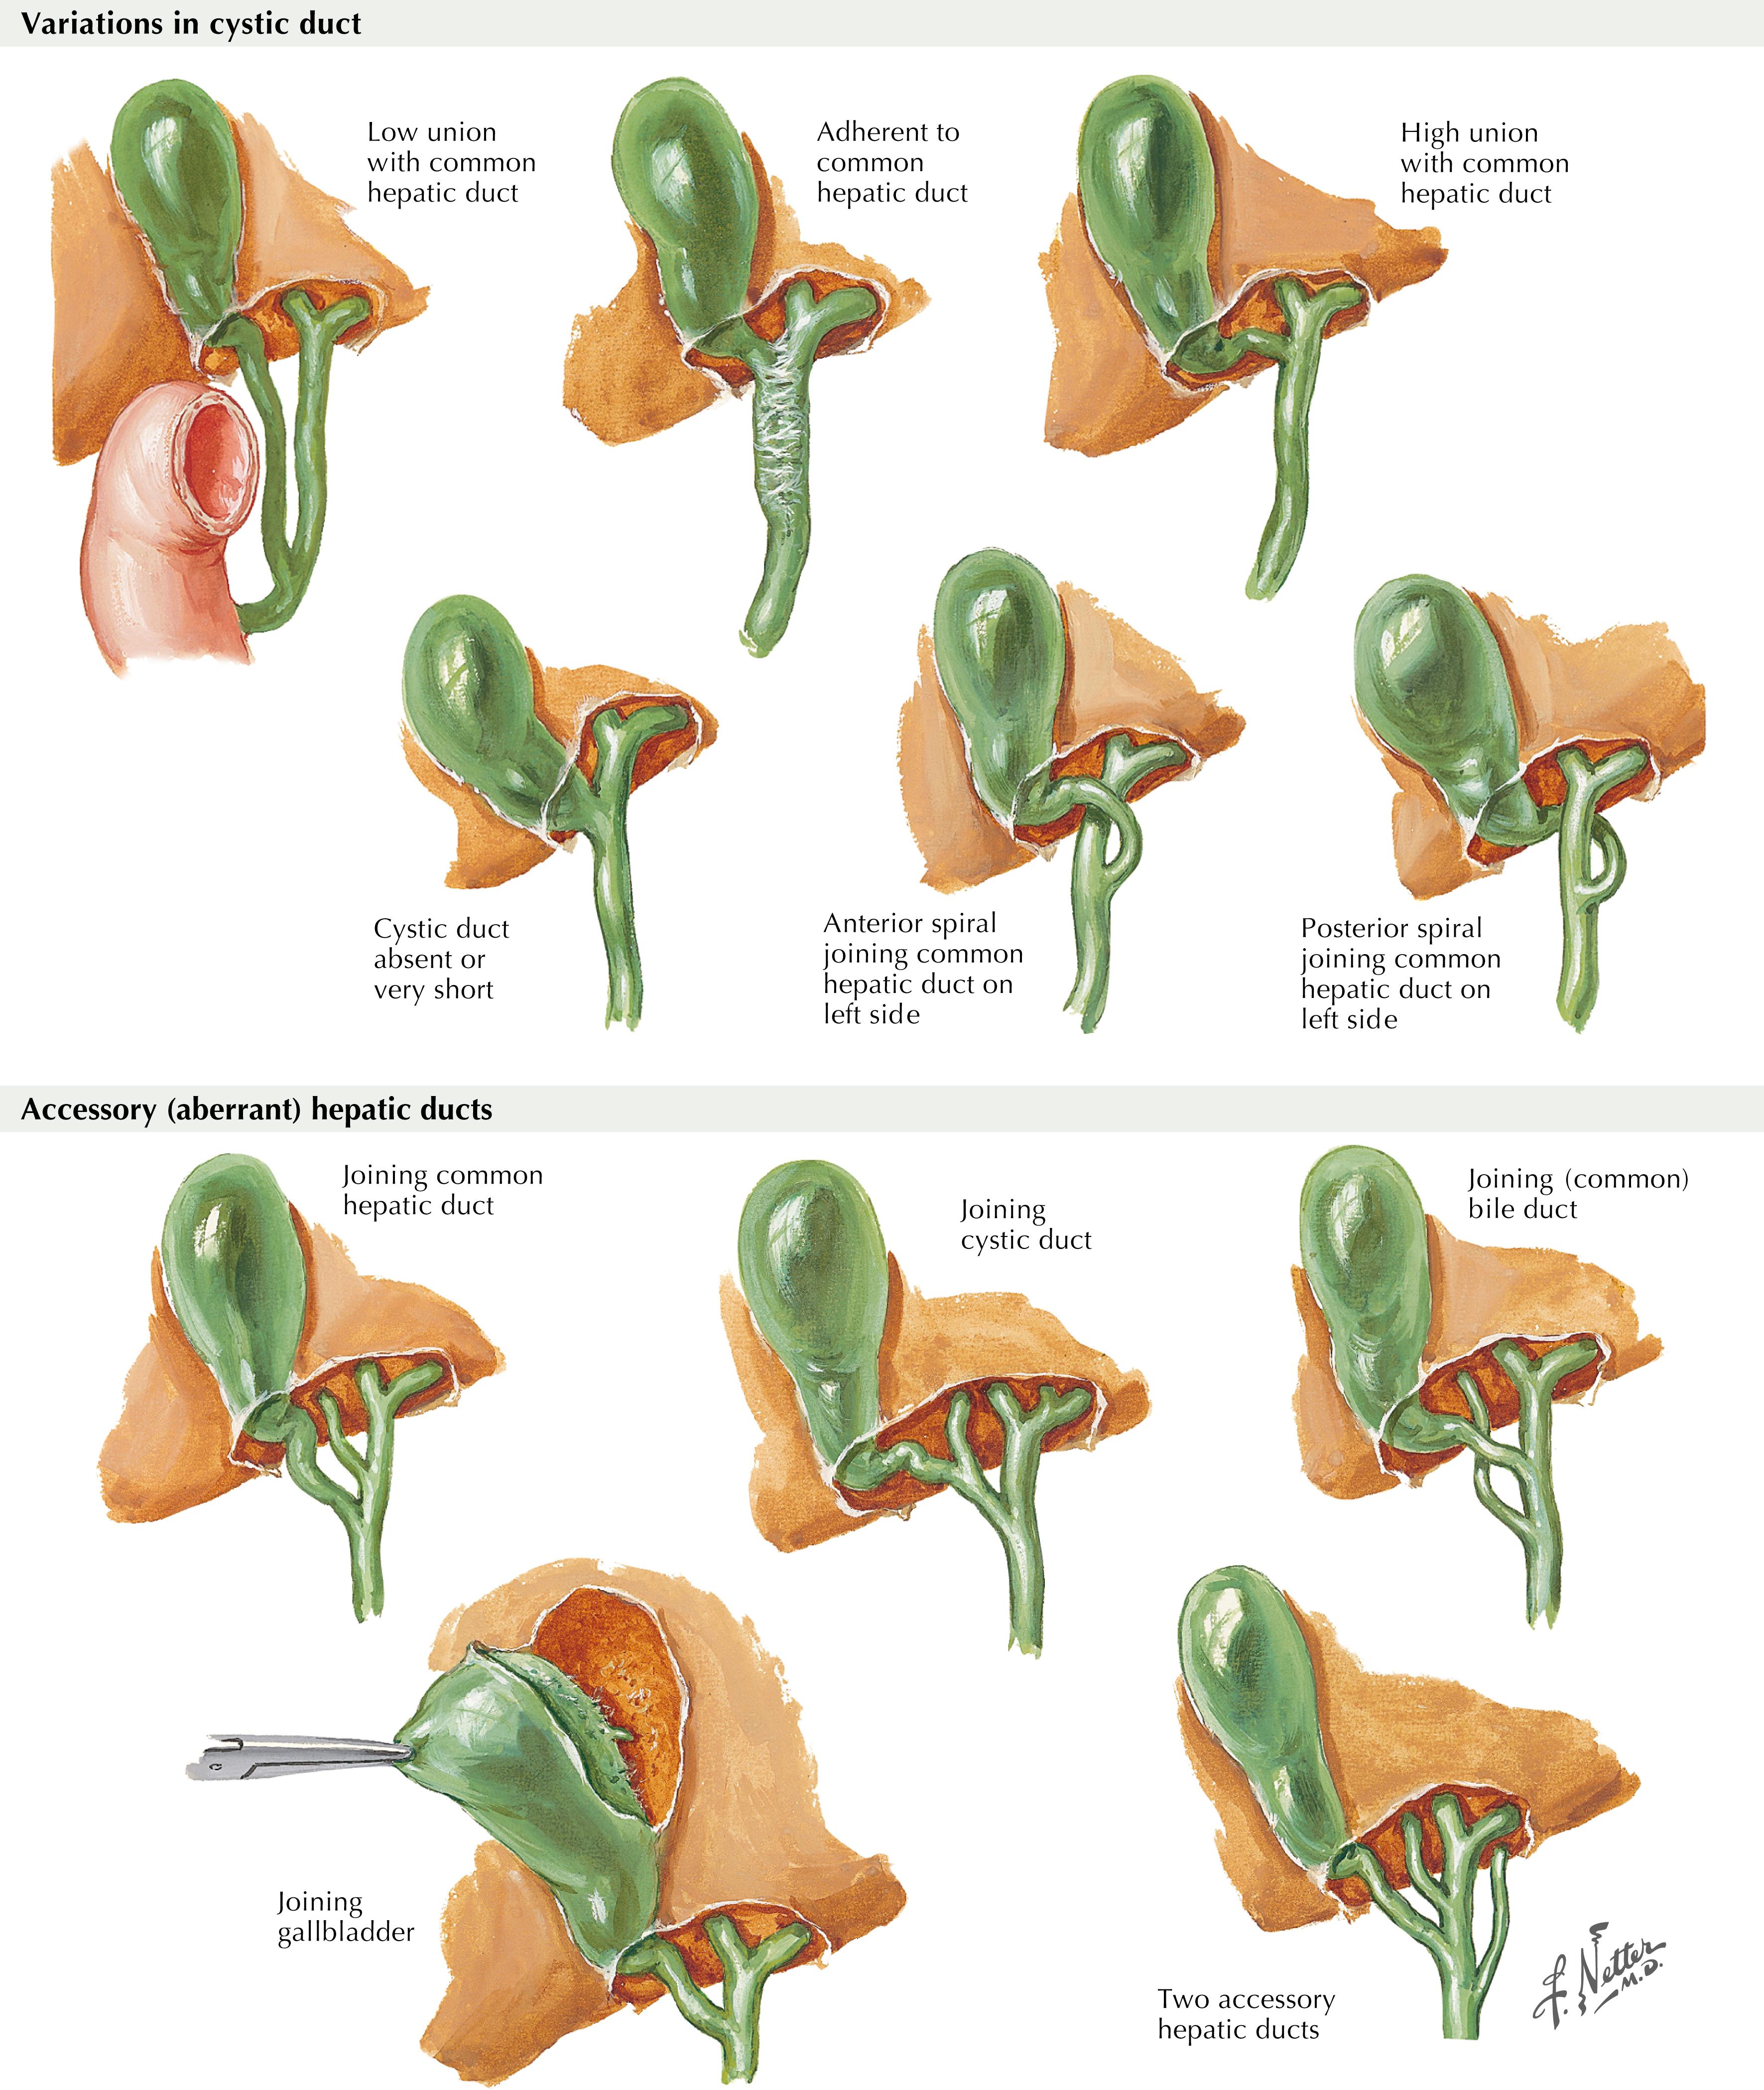 FIGURE 12.2, Variations in cystic and hepatic ducts.